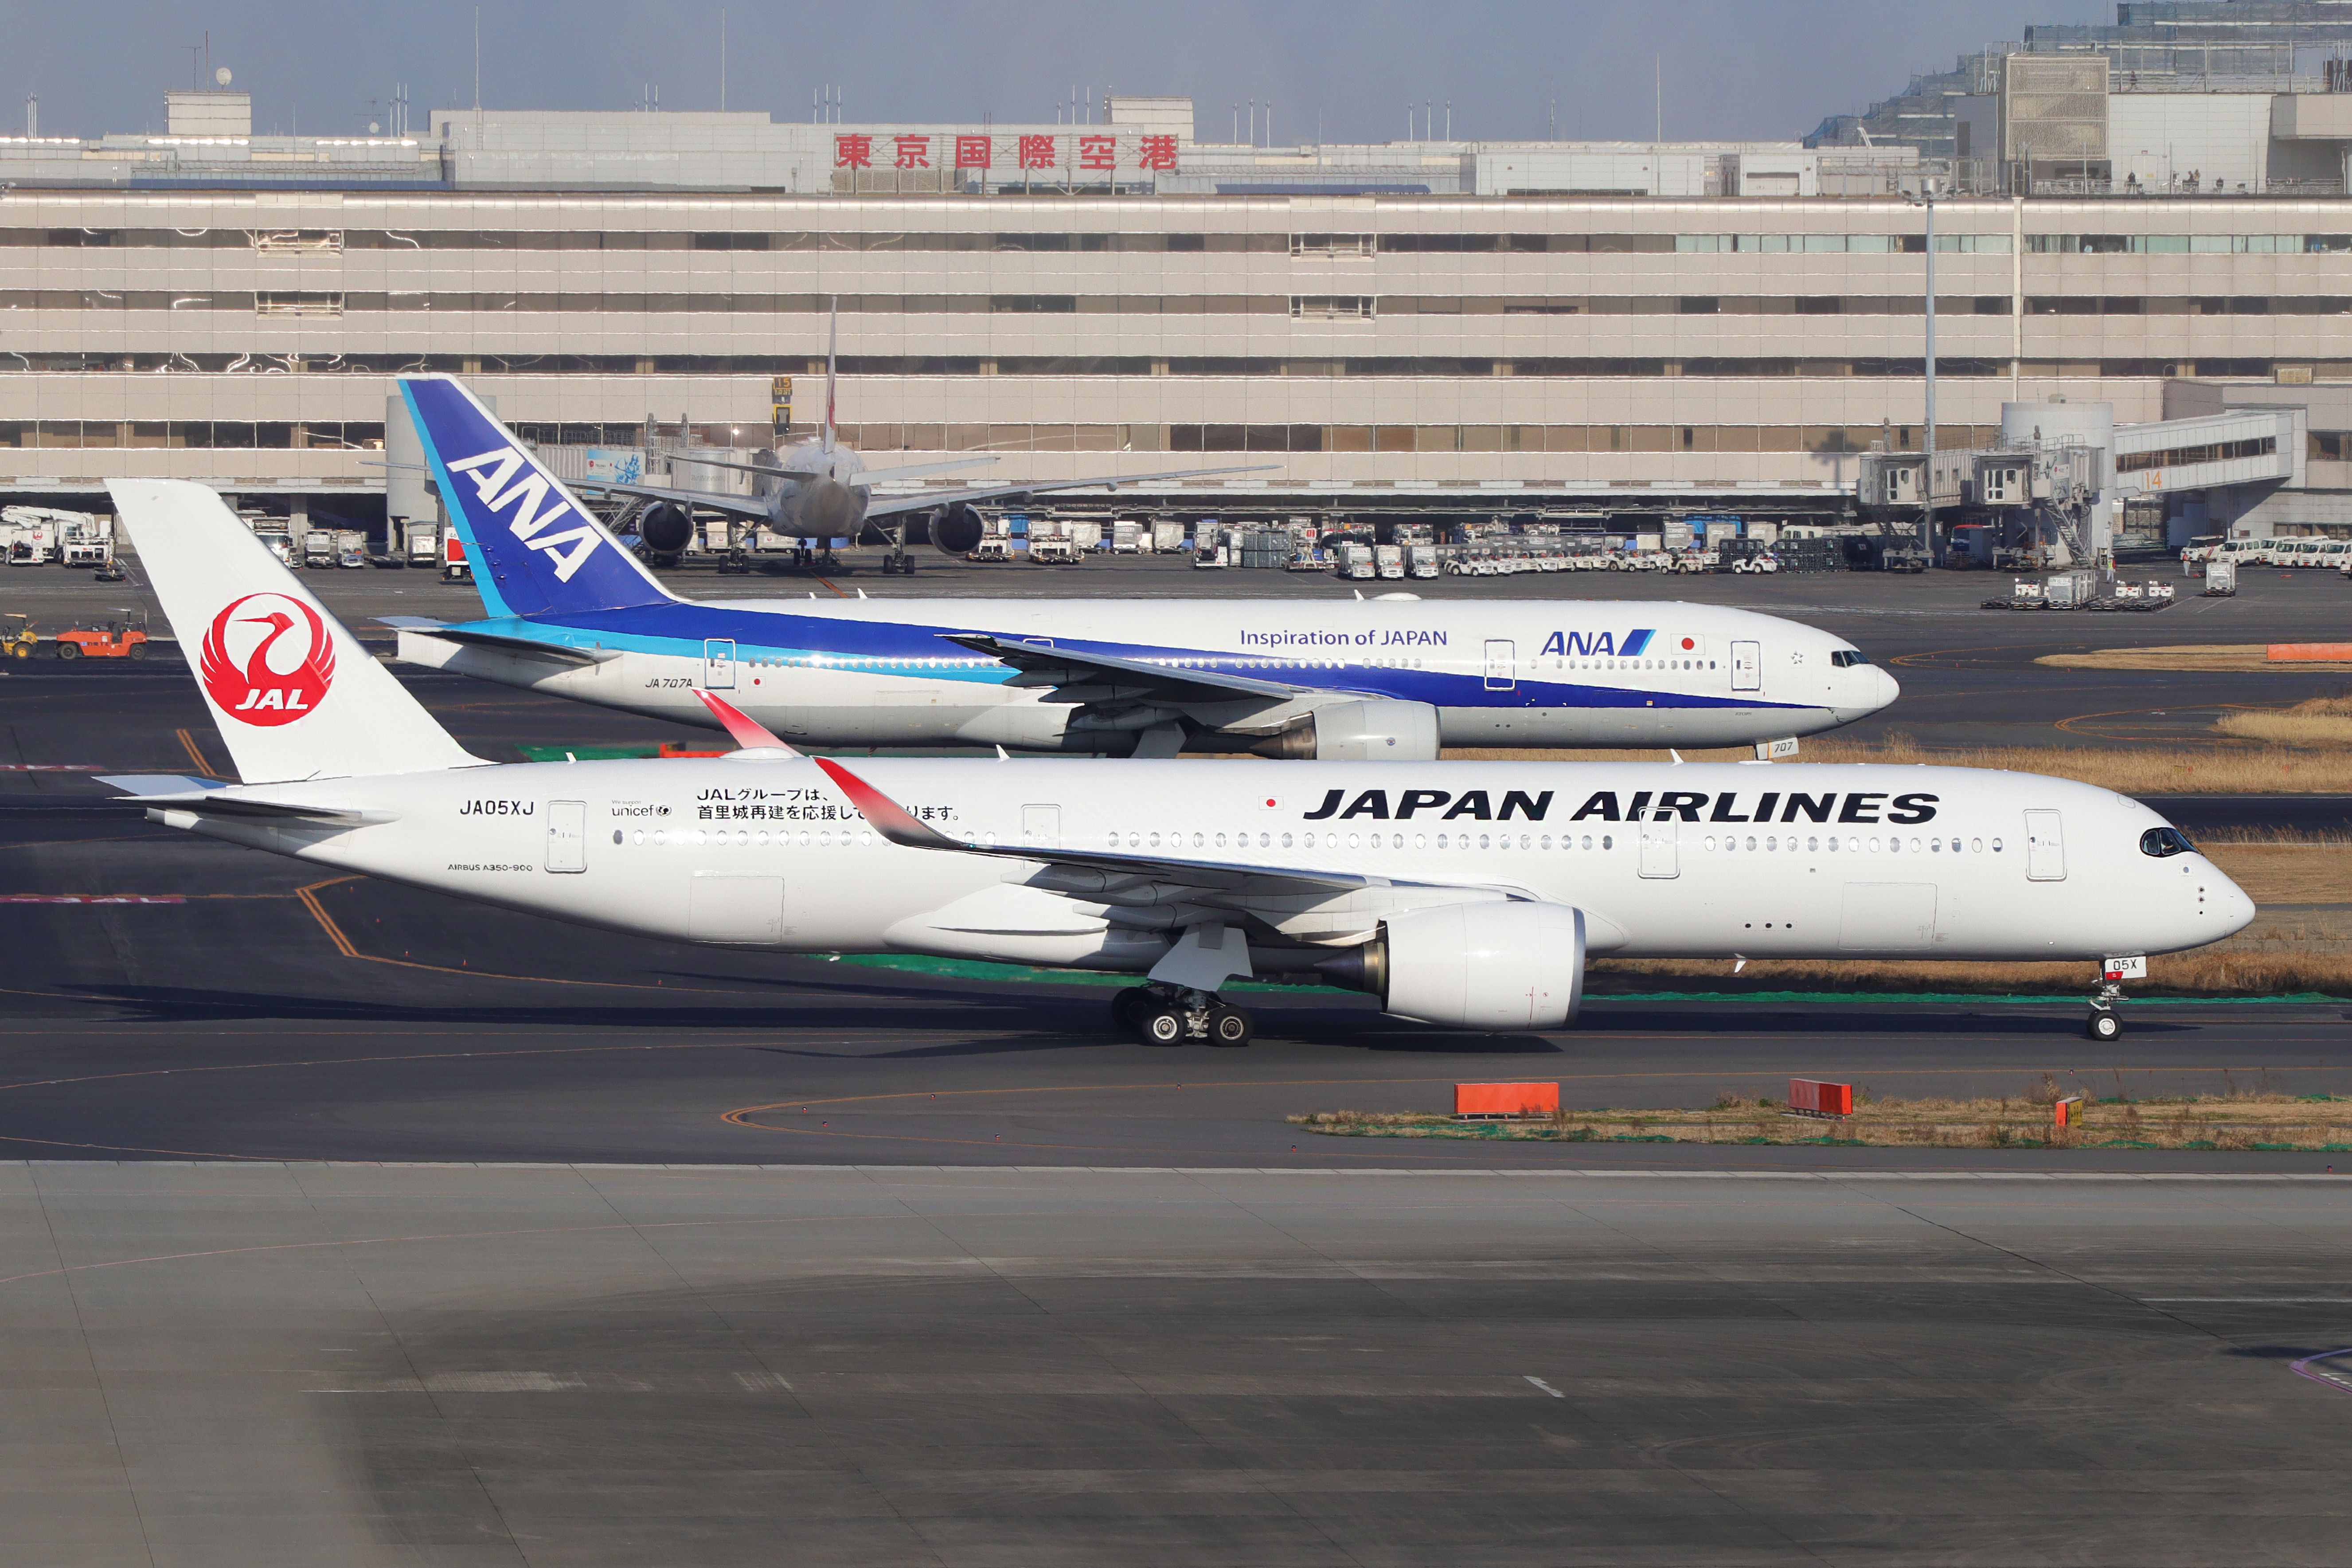 A Japan Airlines Aircraft taxiing alongside an ANA Aircraft at an Airport In Tokyo.